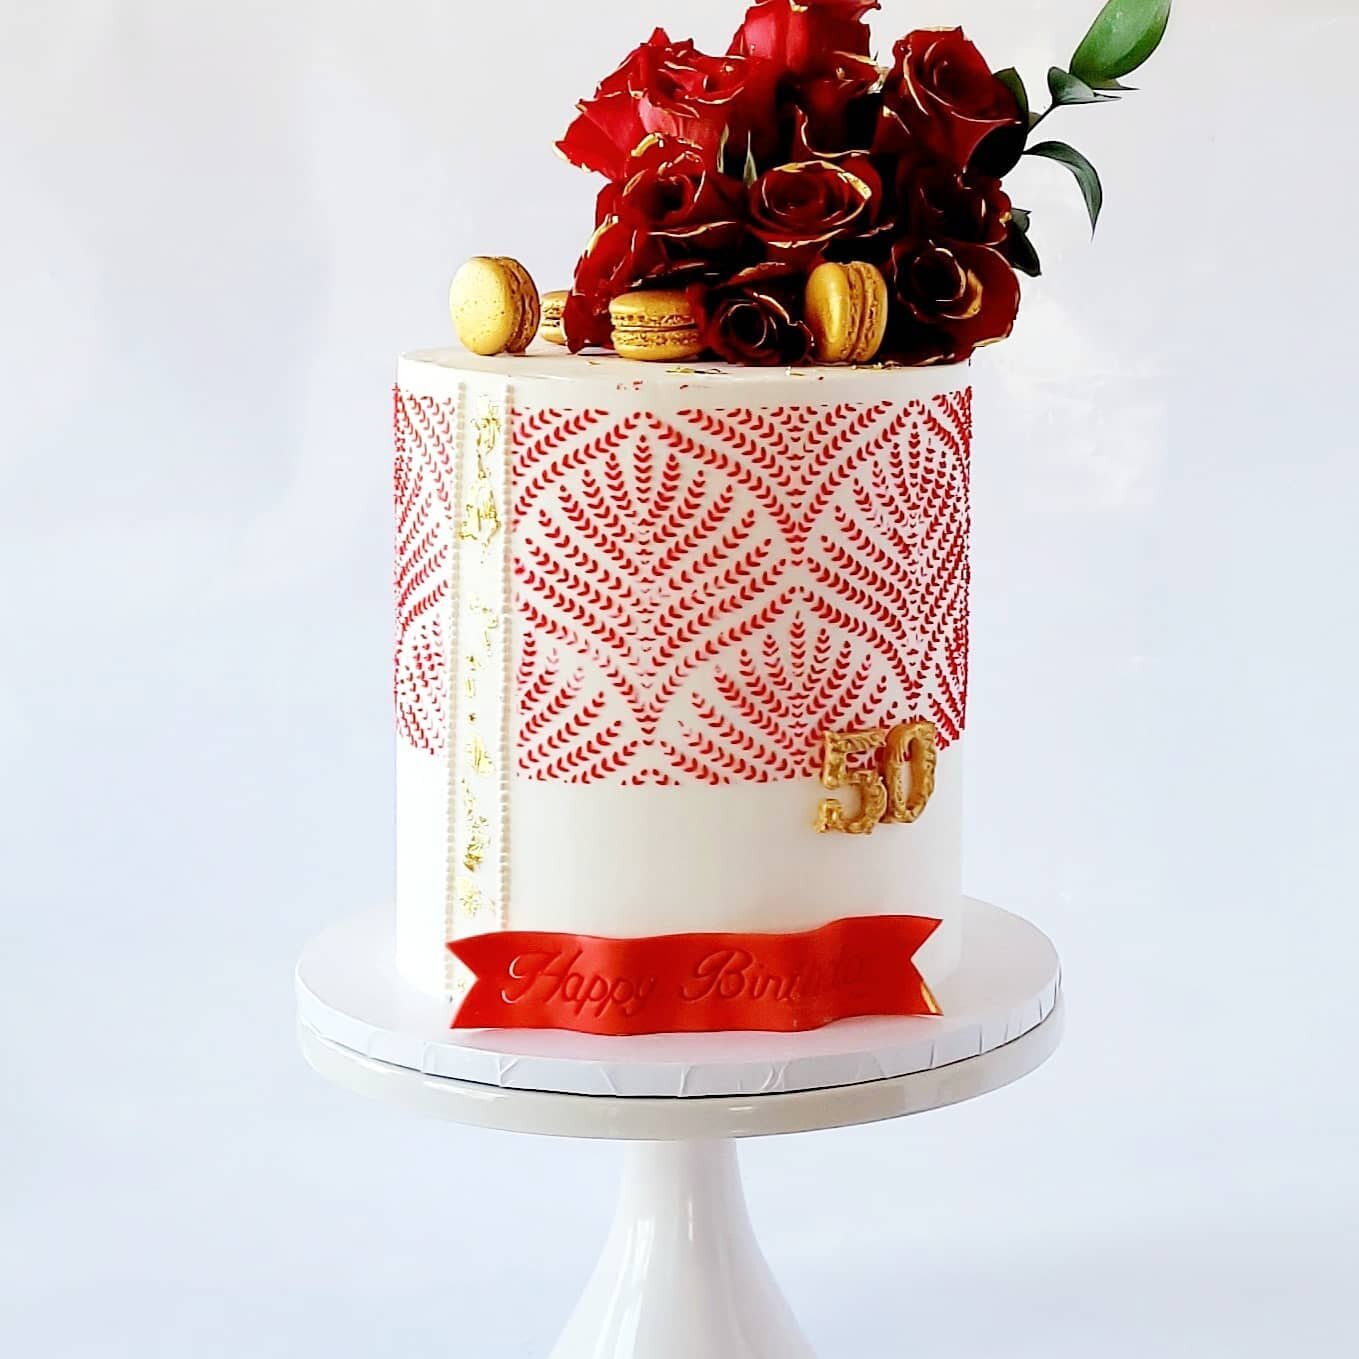 I've been so excited to post this beauty! Over the past few months, I've seen several cake artists use this stencil, which made me eager to get one of my own. I definitely waited too long. It's gorgeous. 

This customer was in need of an elegant, age